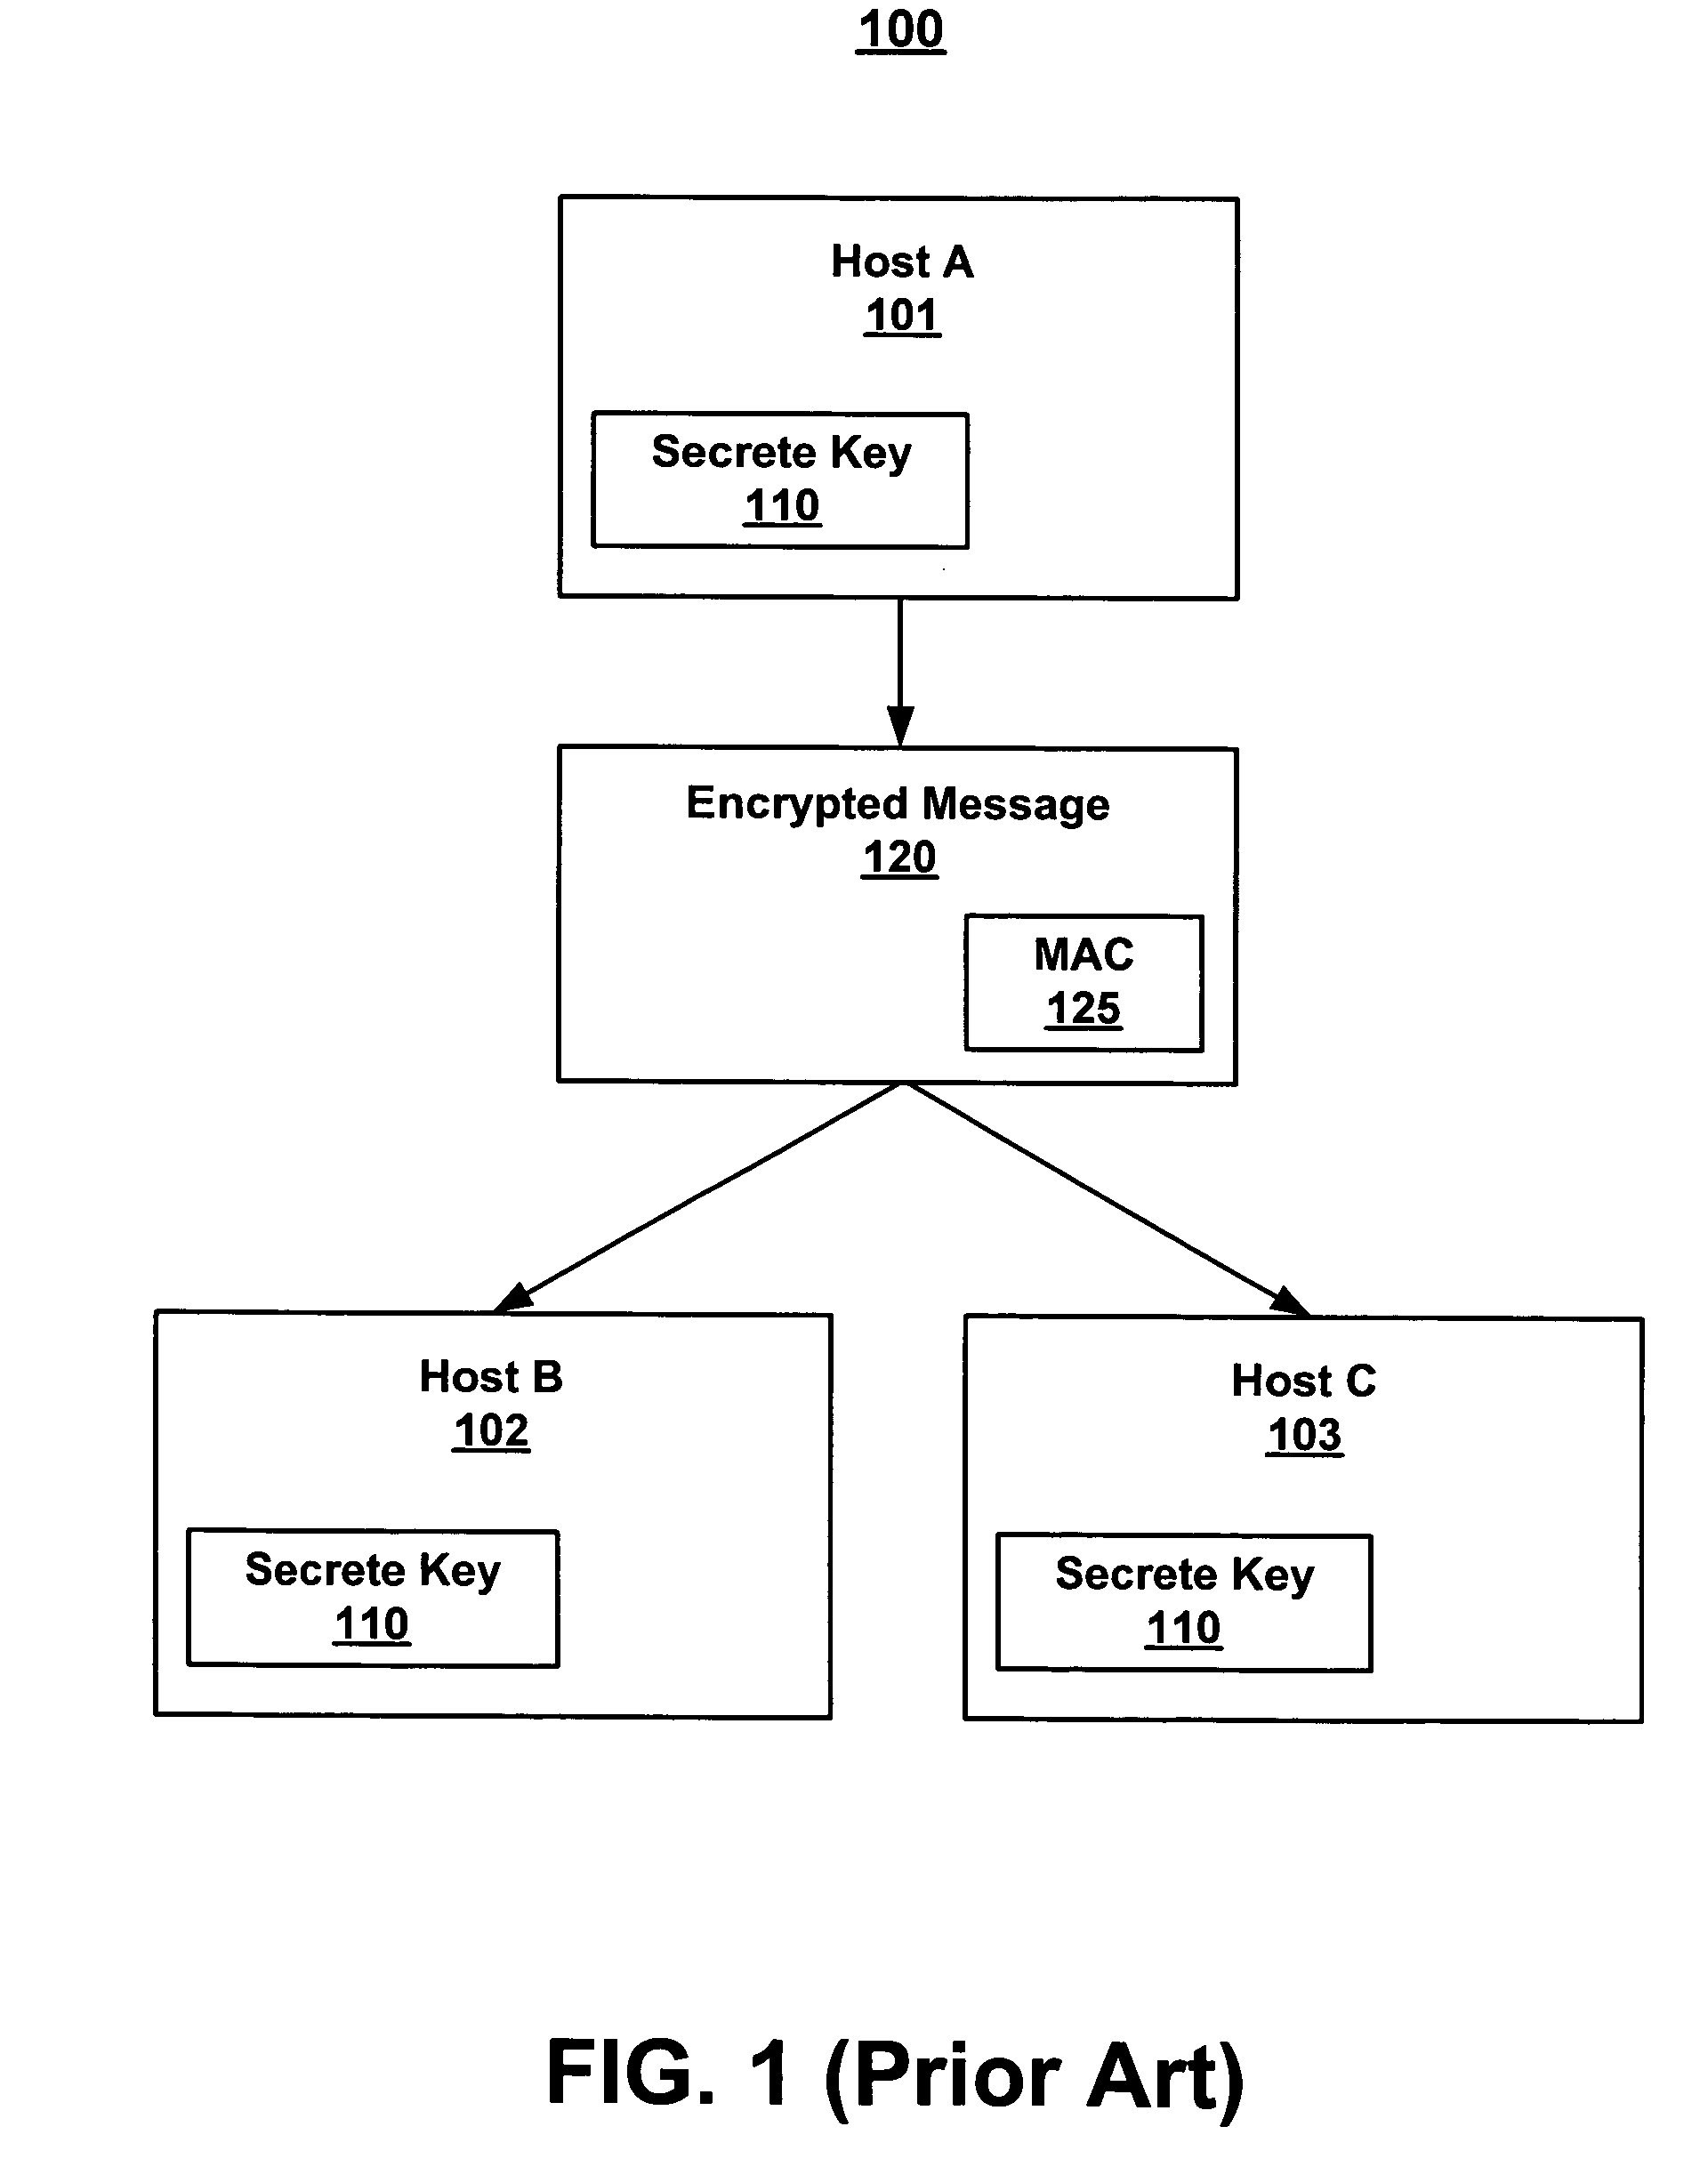 Dynamic source authentication and encryption cryptographic scheme for a group-based secure communication environment